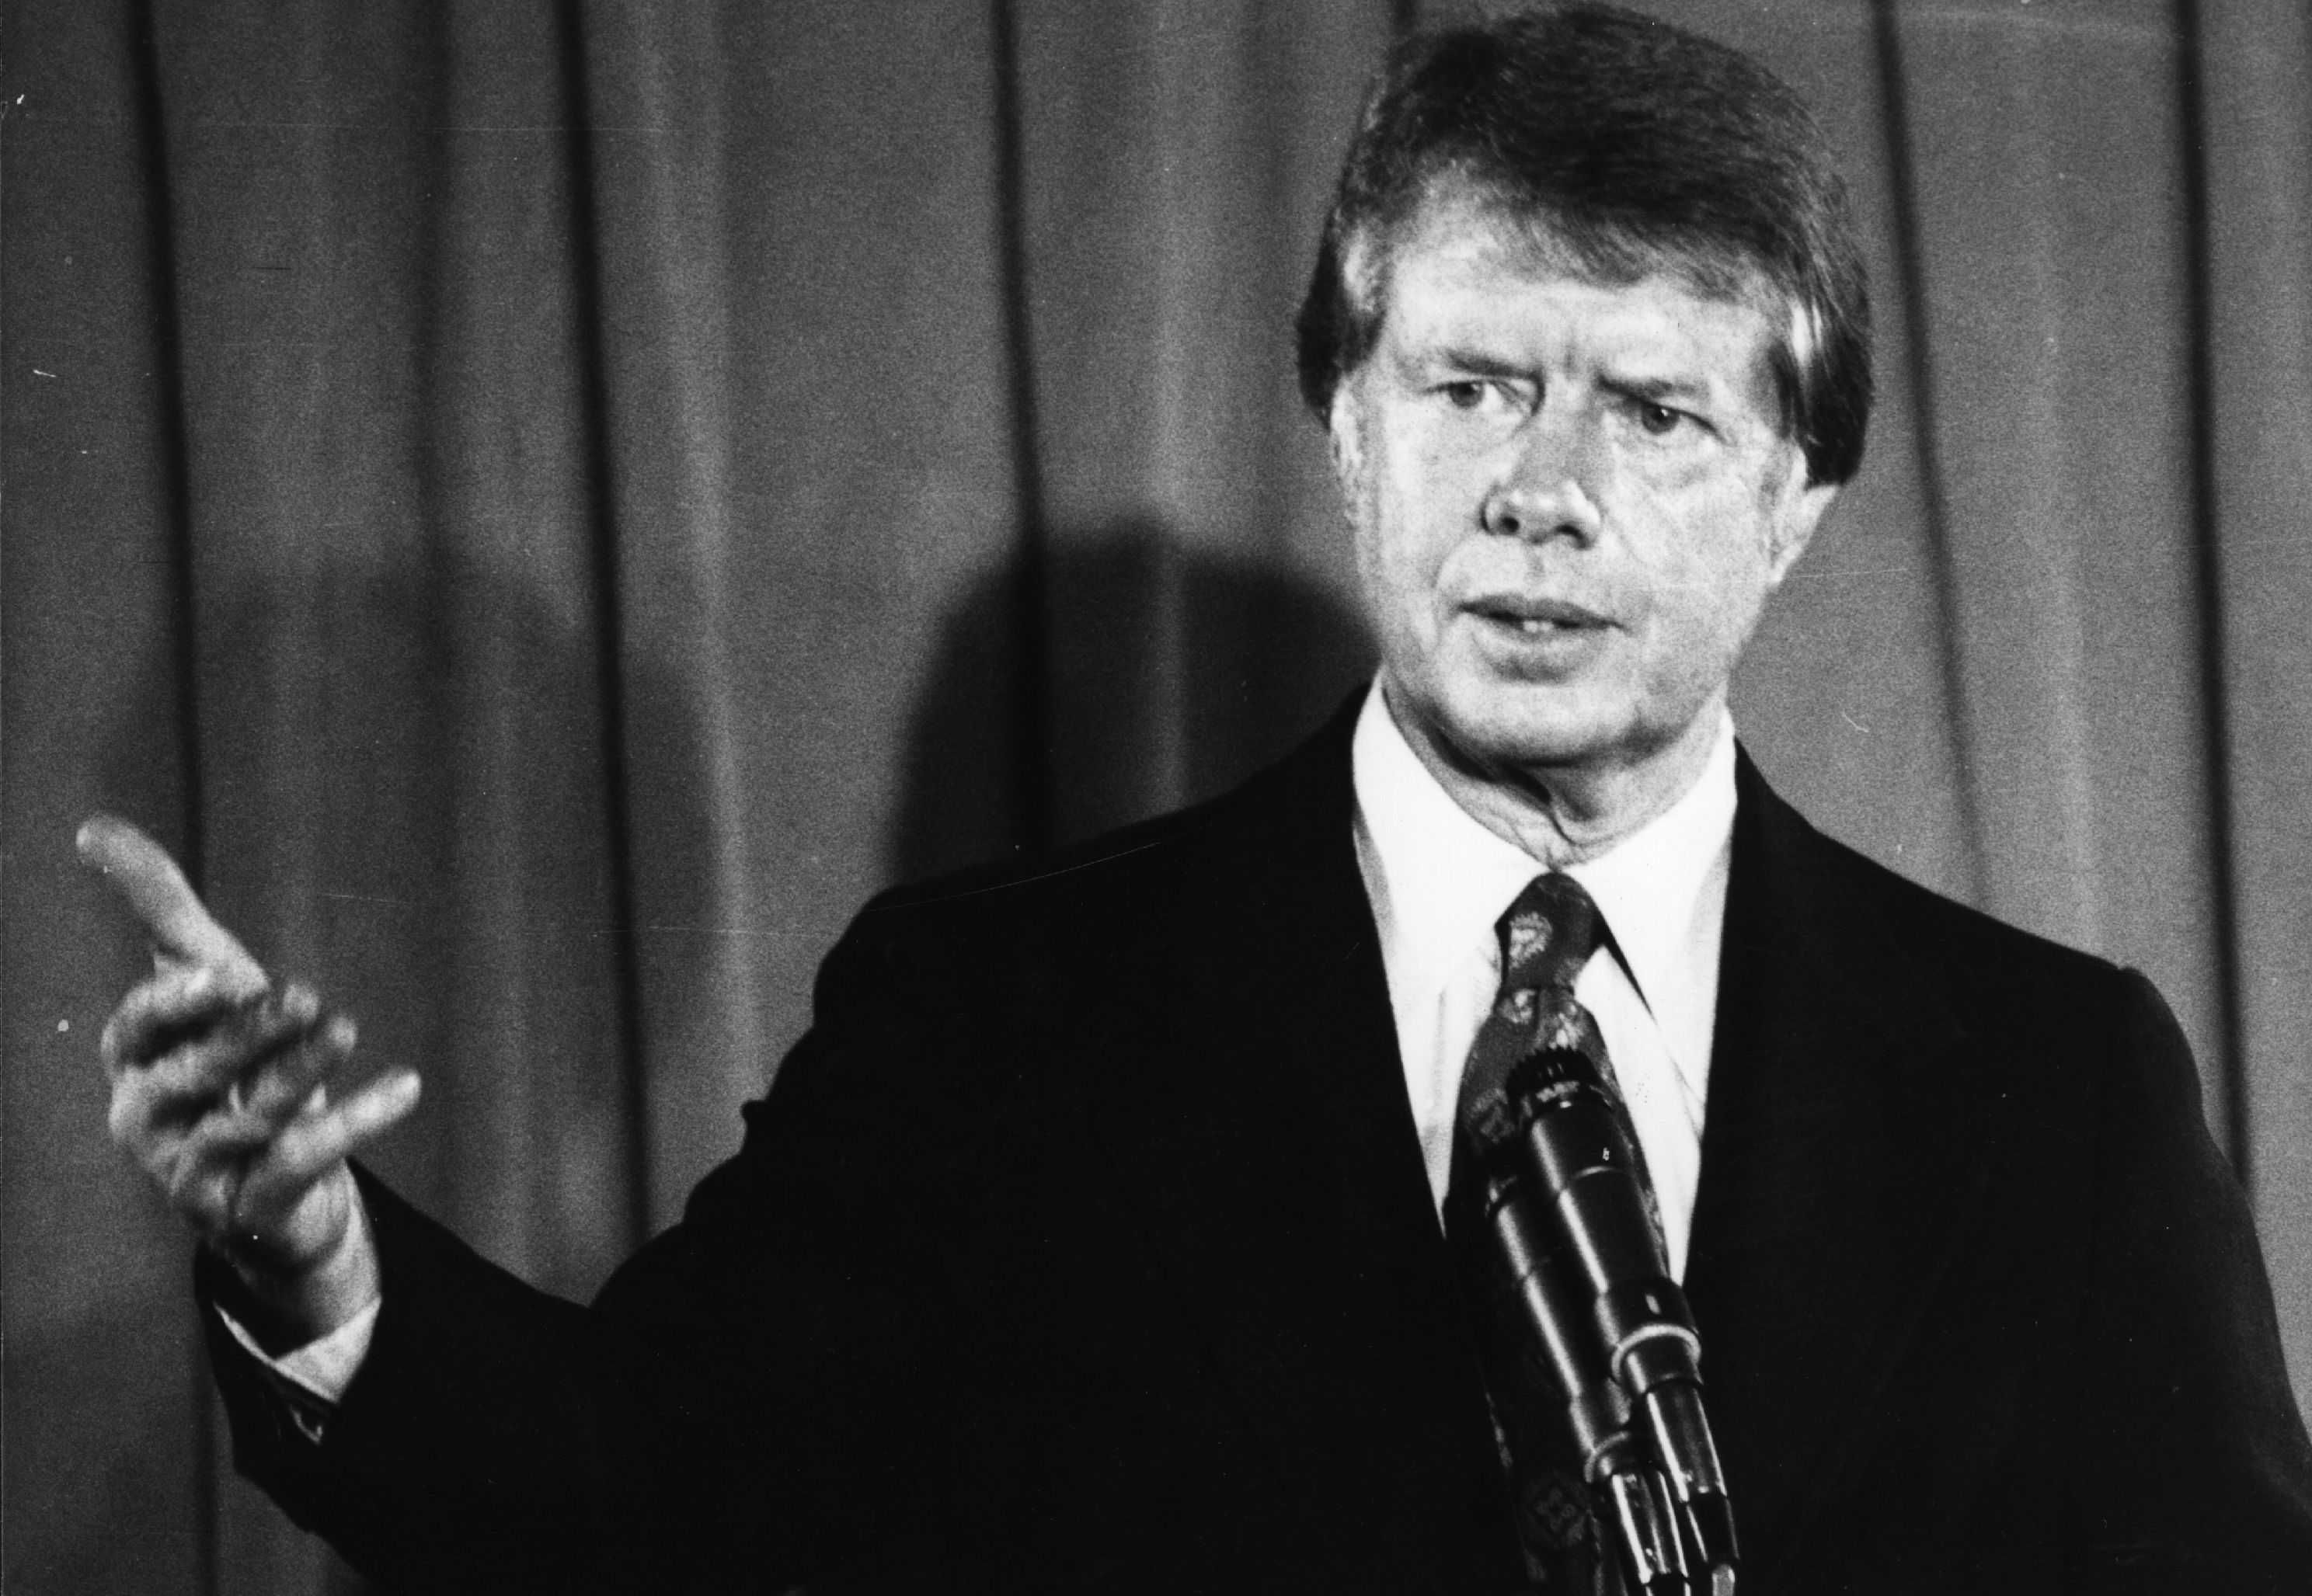 Jimmy Carter: Family Affair to the White House and Beyond